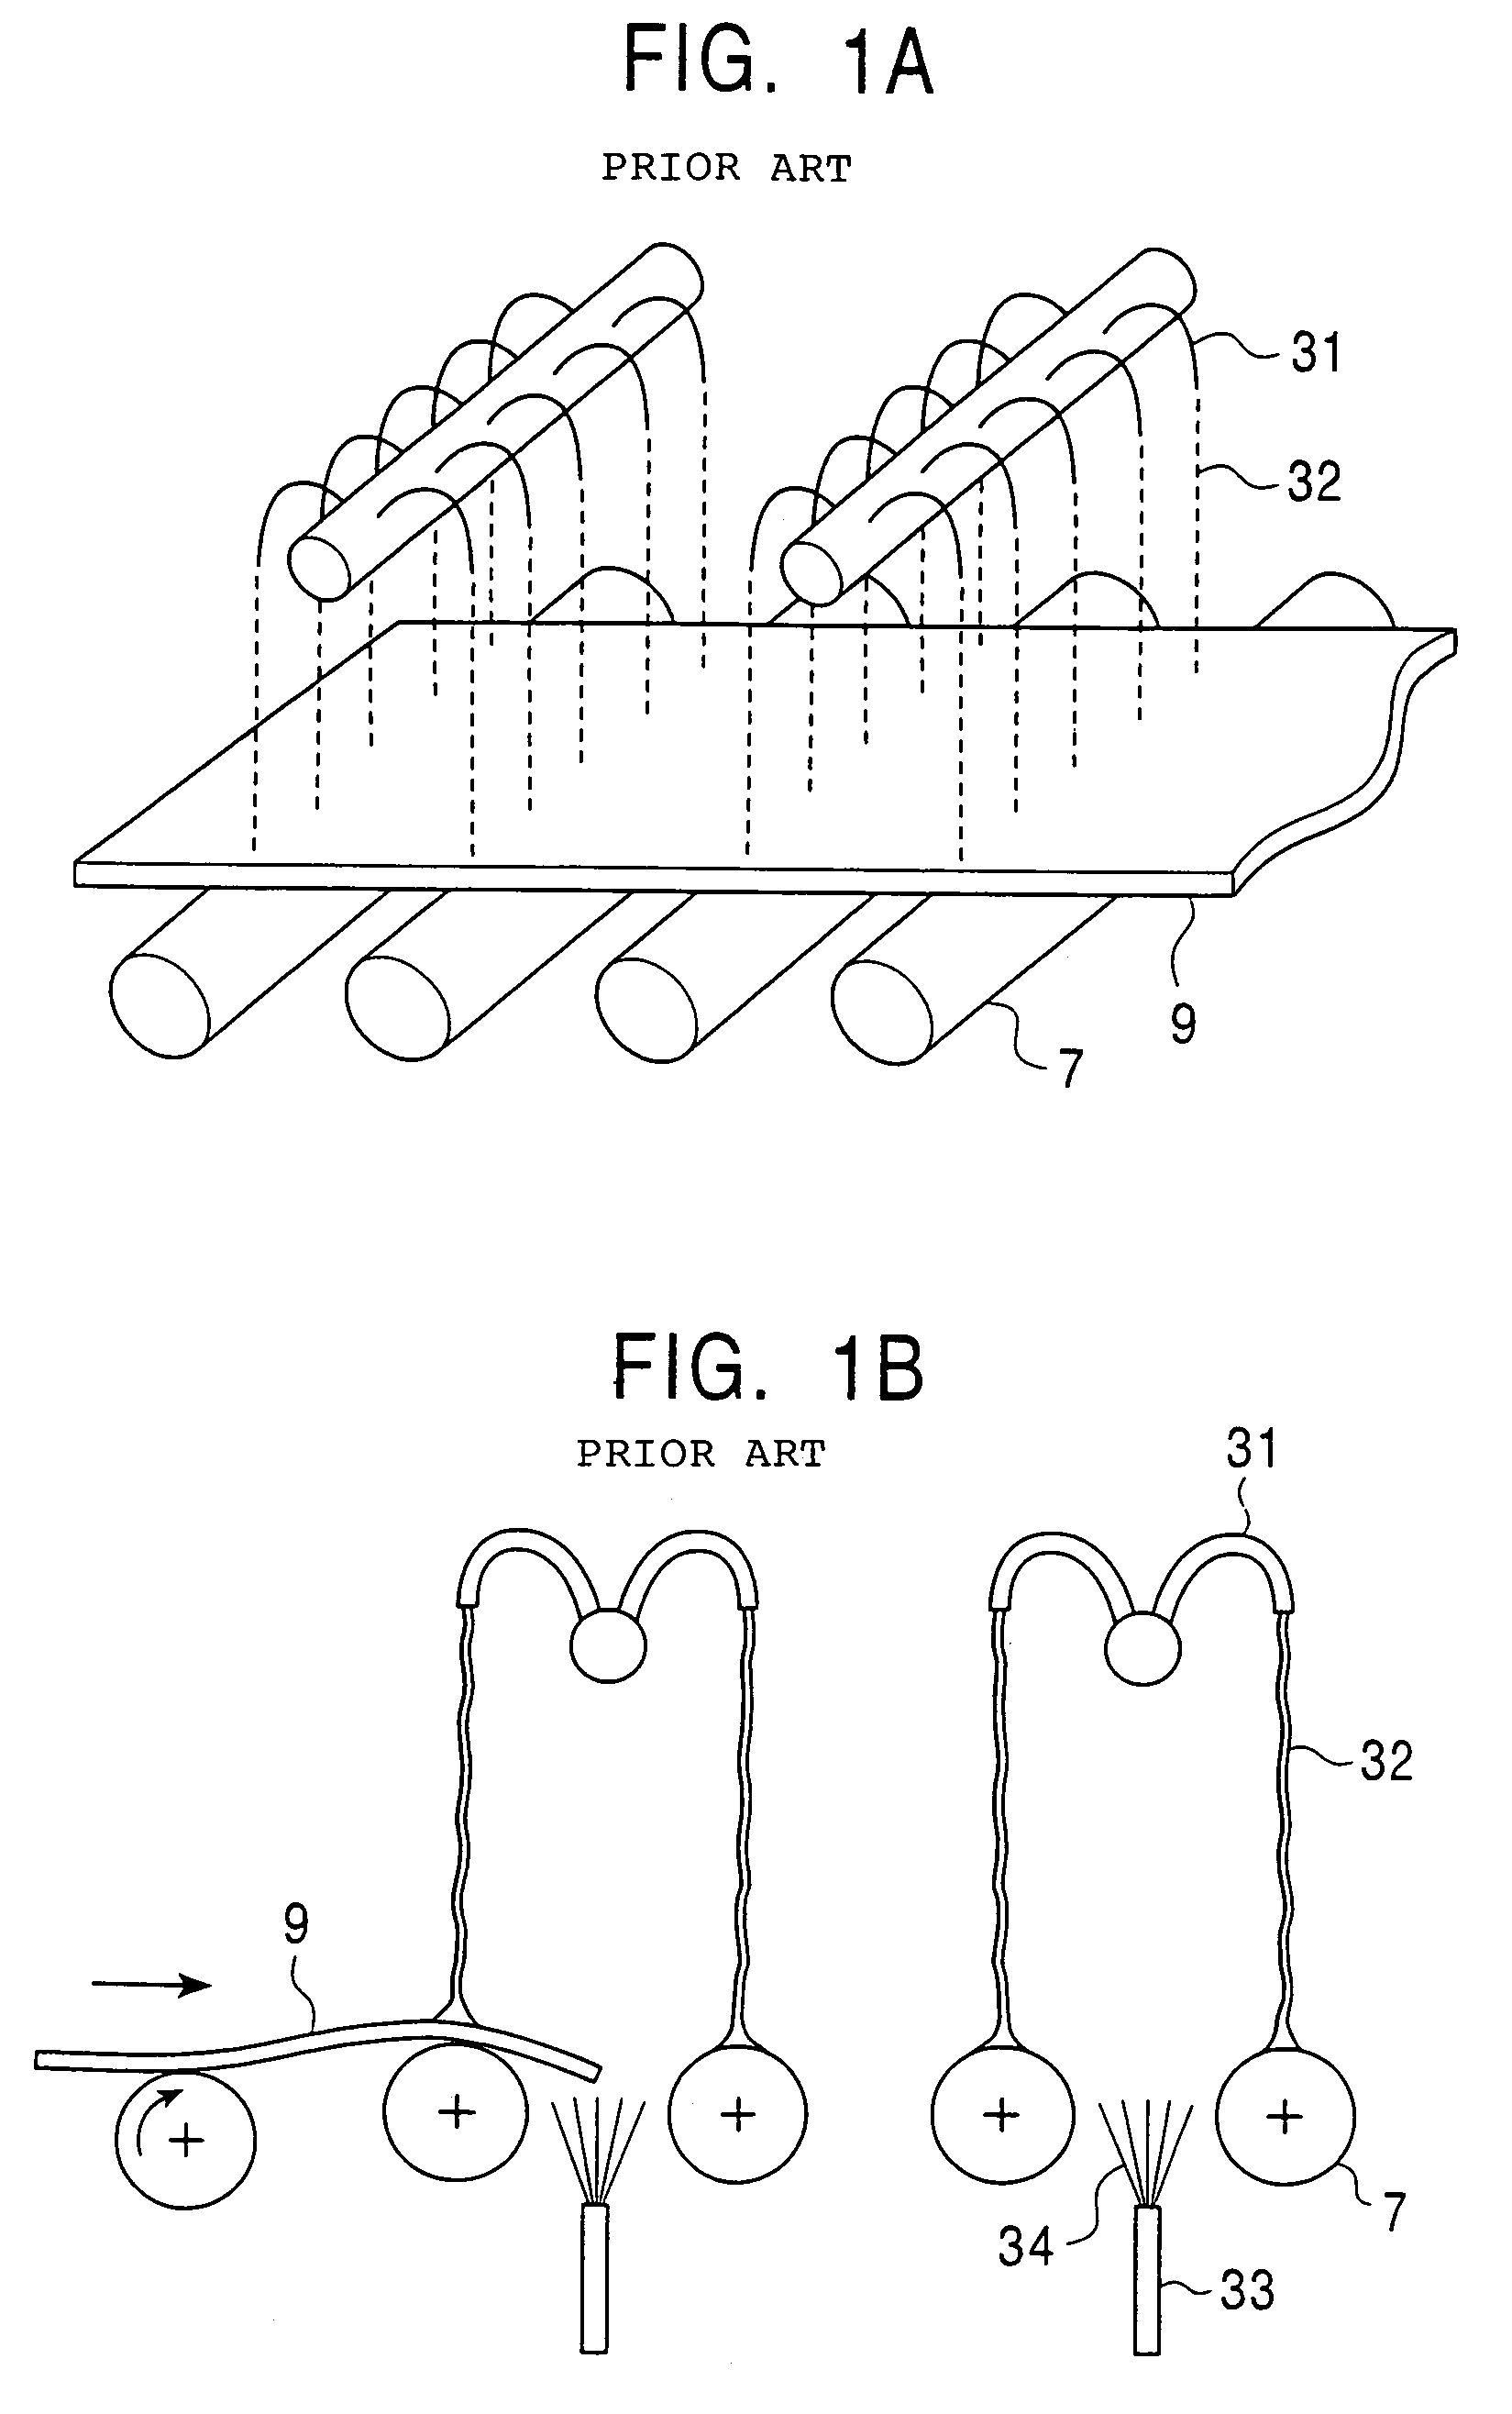 Cooling device, manufacturing method, and manufacturing line for hot rolled steel band